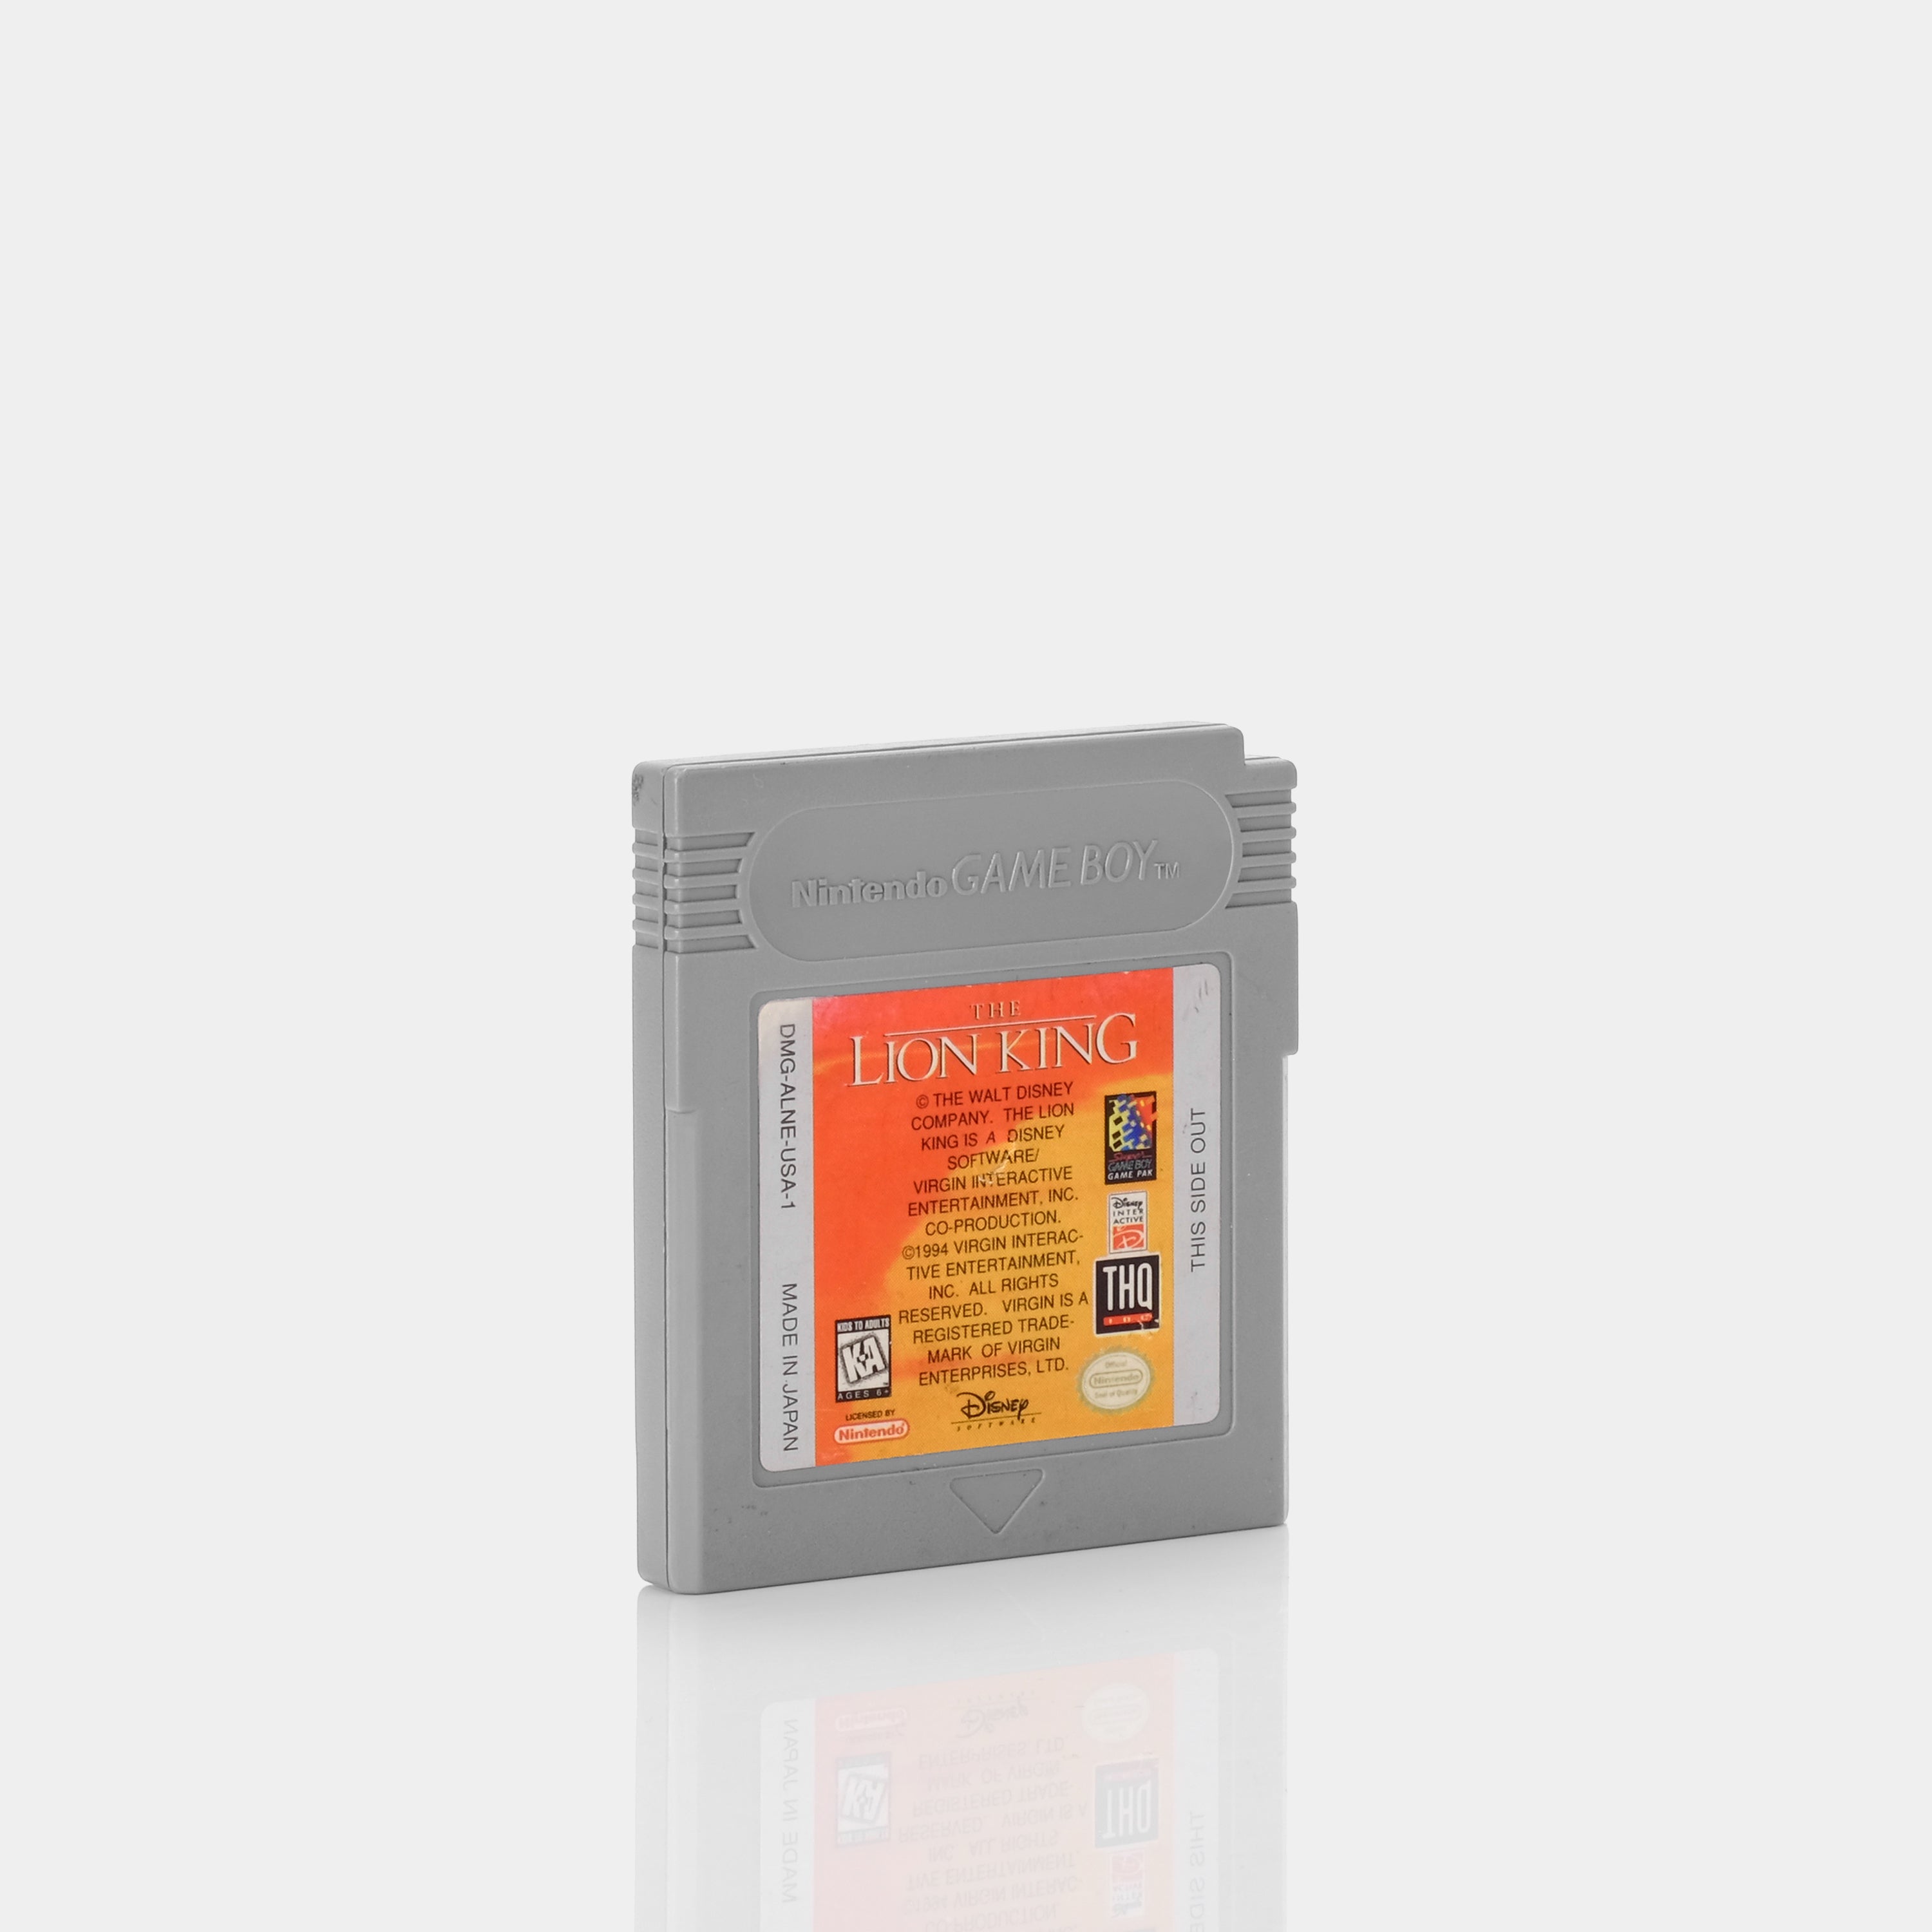 The Lion King Game Boy Game